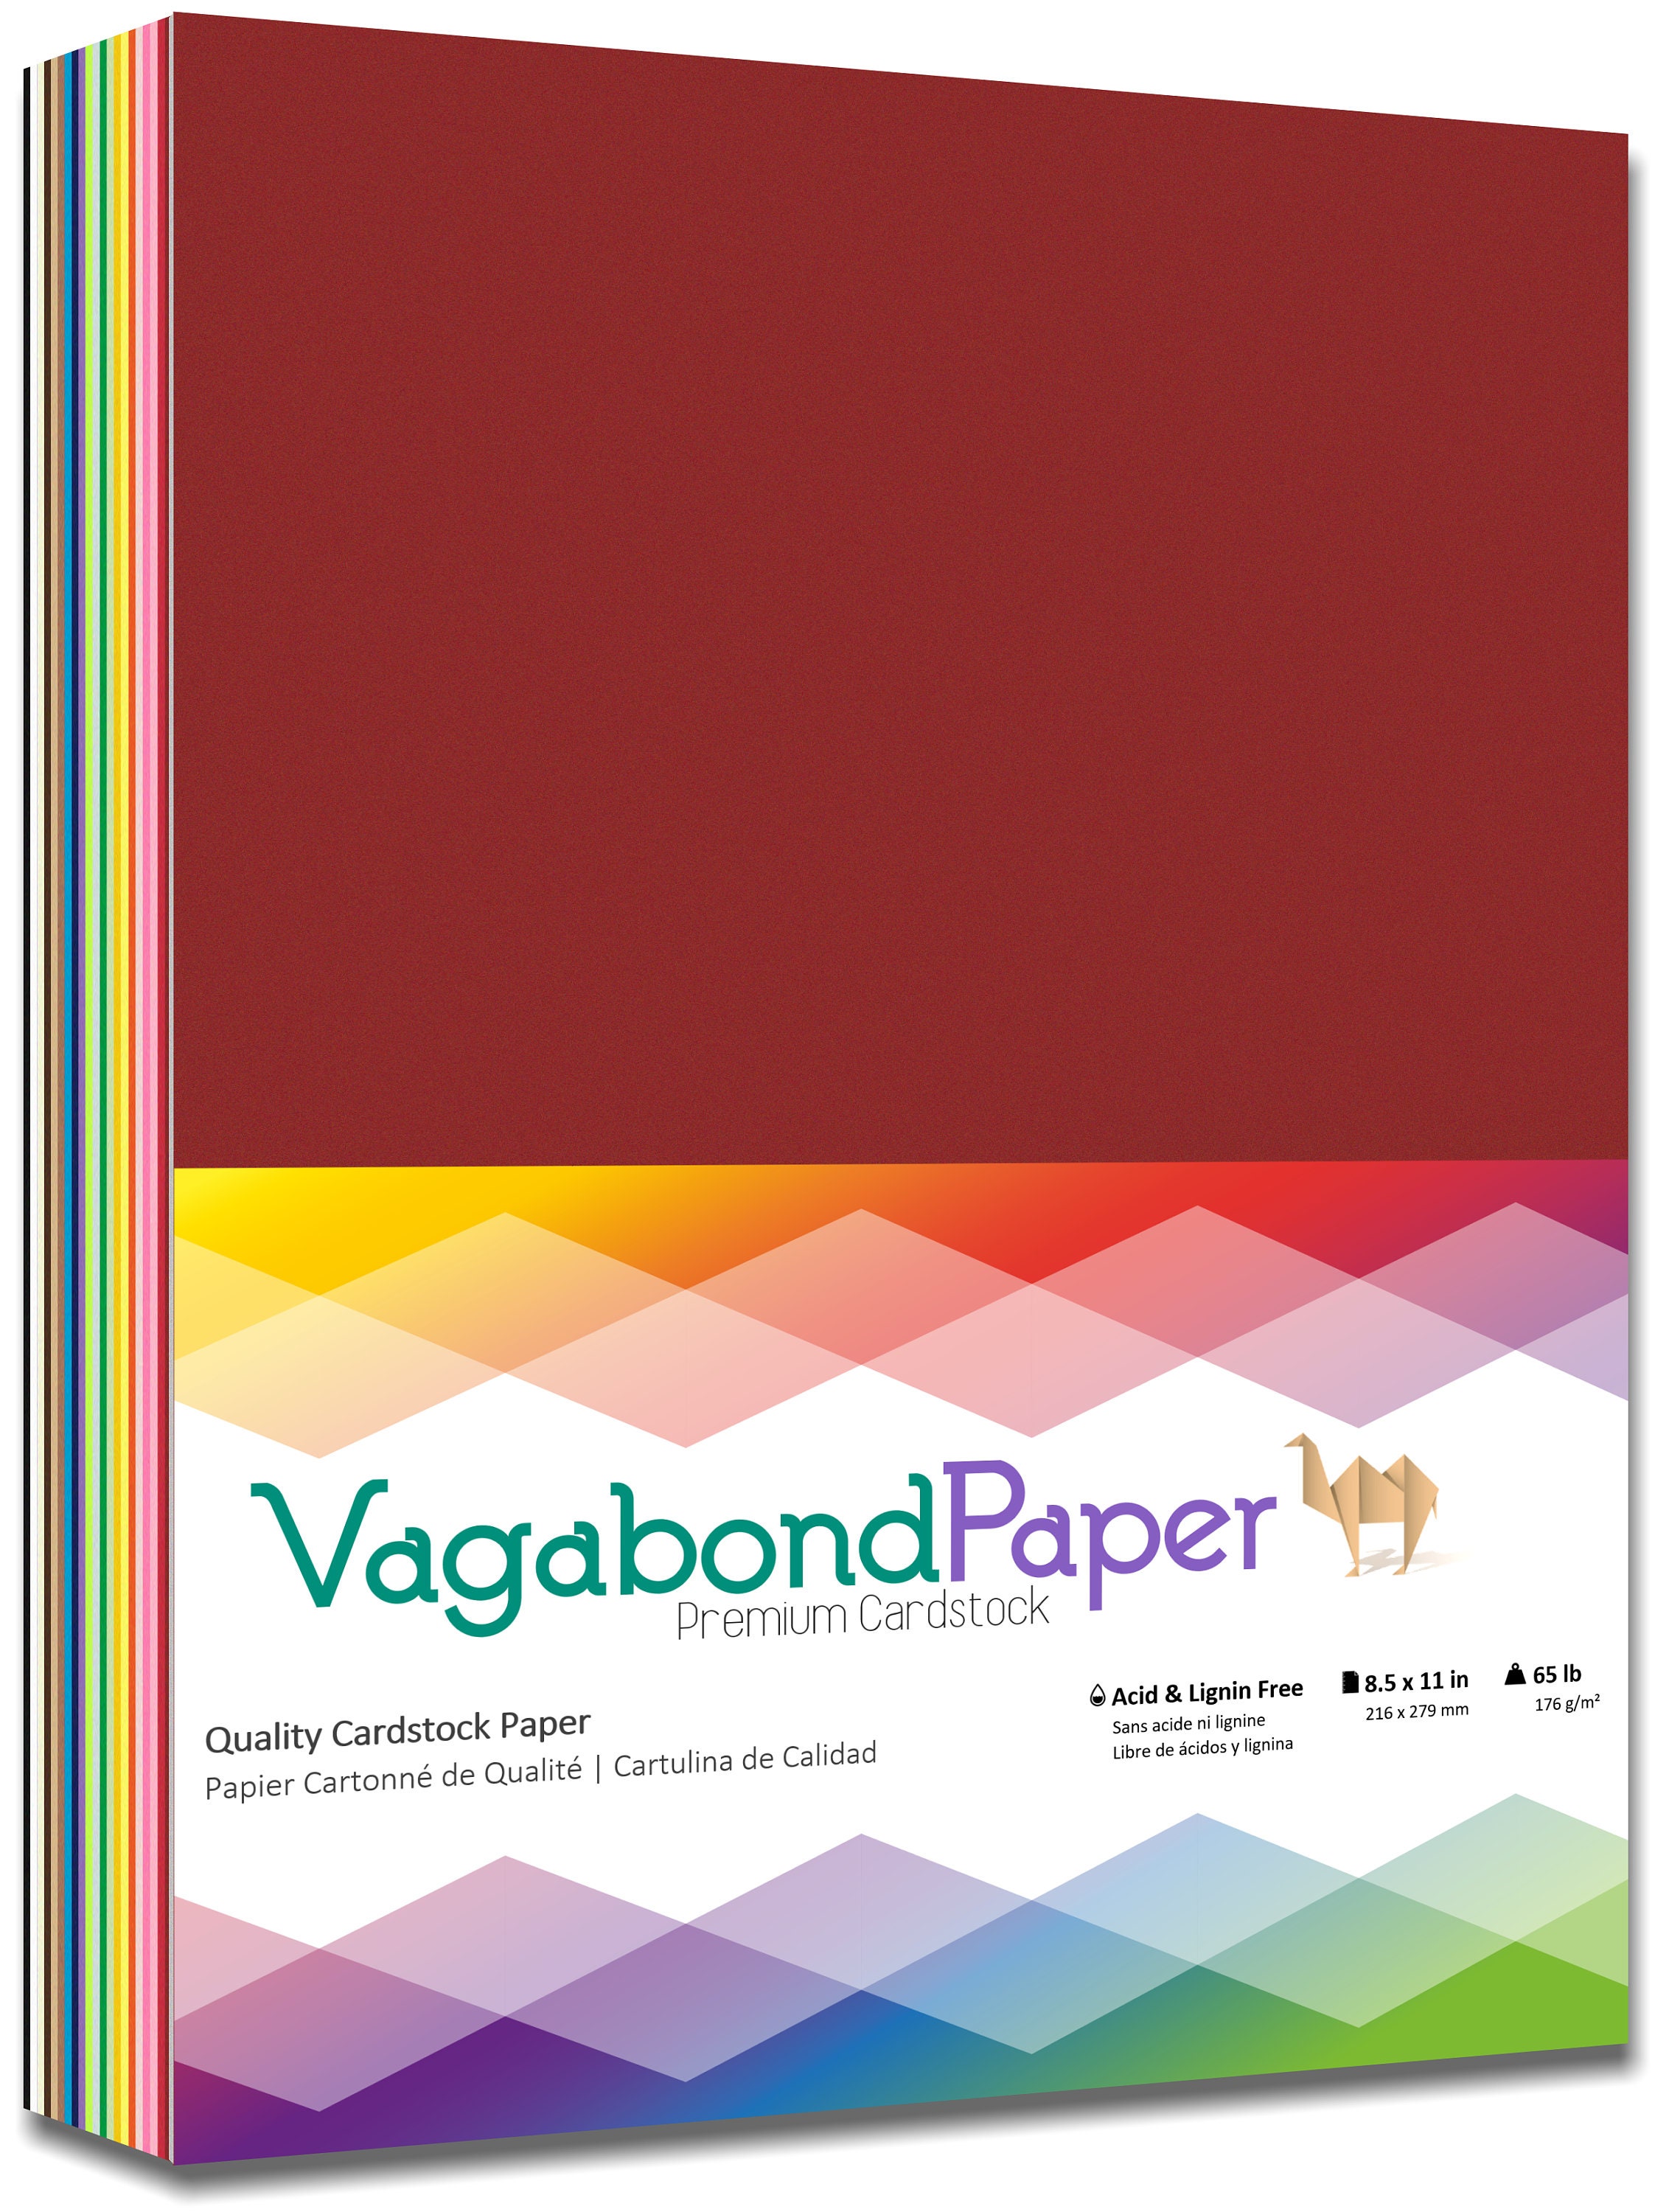 Paper Accents Cardstock Variety Pack 5x 7 Rainbow 65lb Modern Hues 250pc